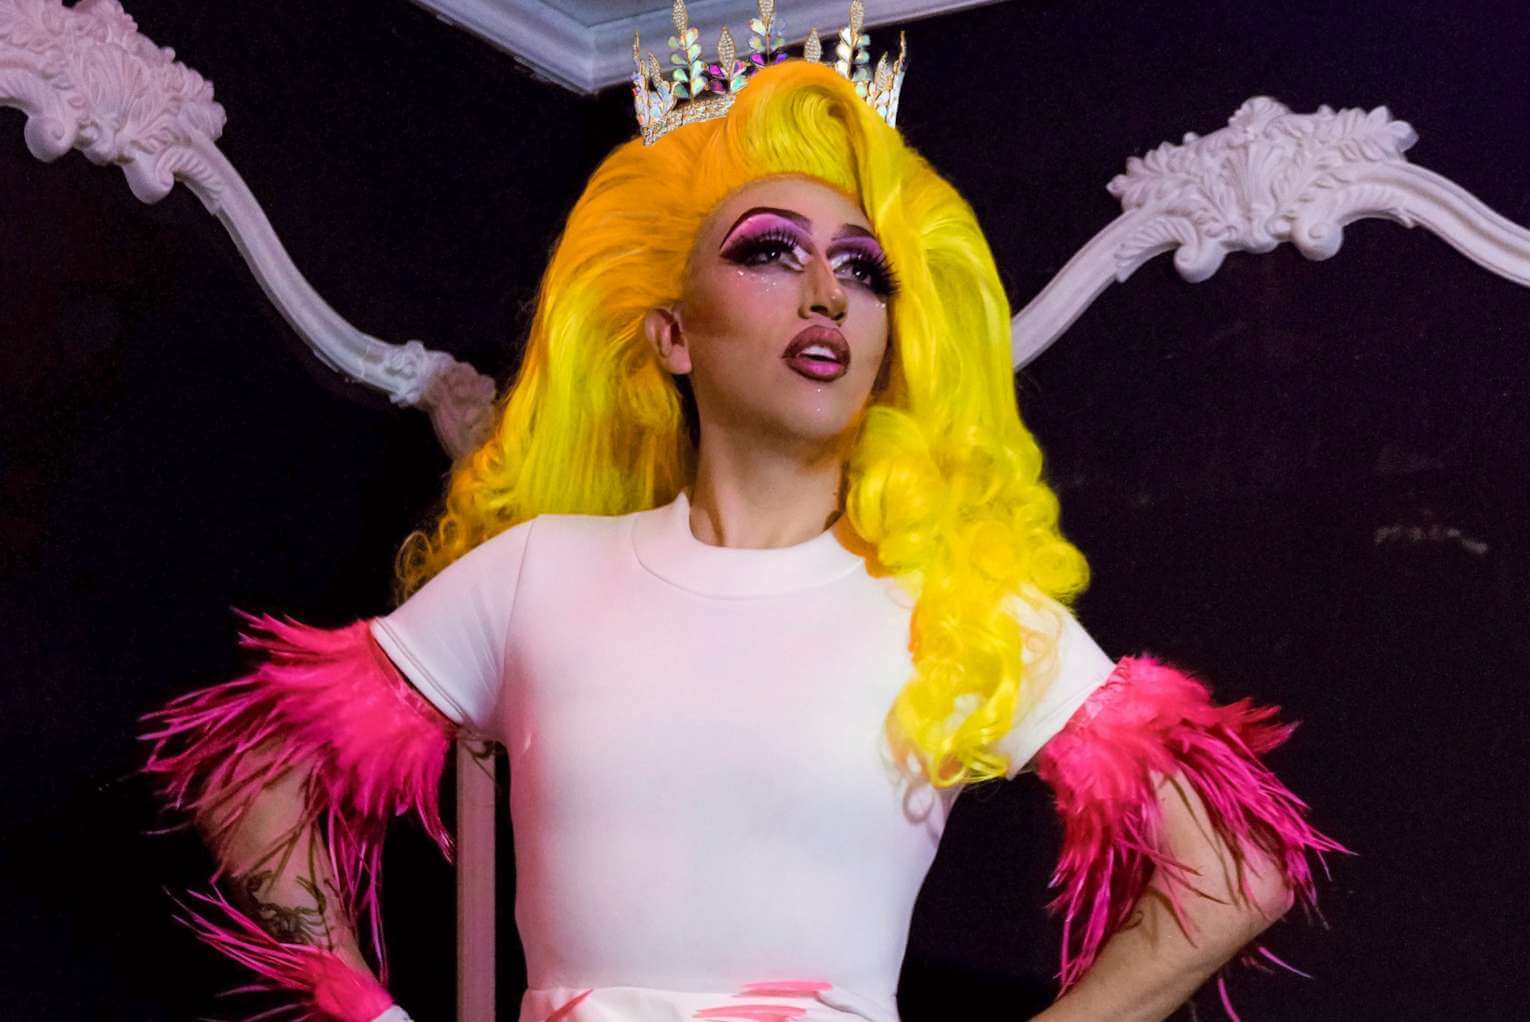 Morning Rundown: School Staff Removed Following Drag Queen’s Provocative Performance